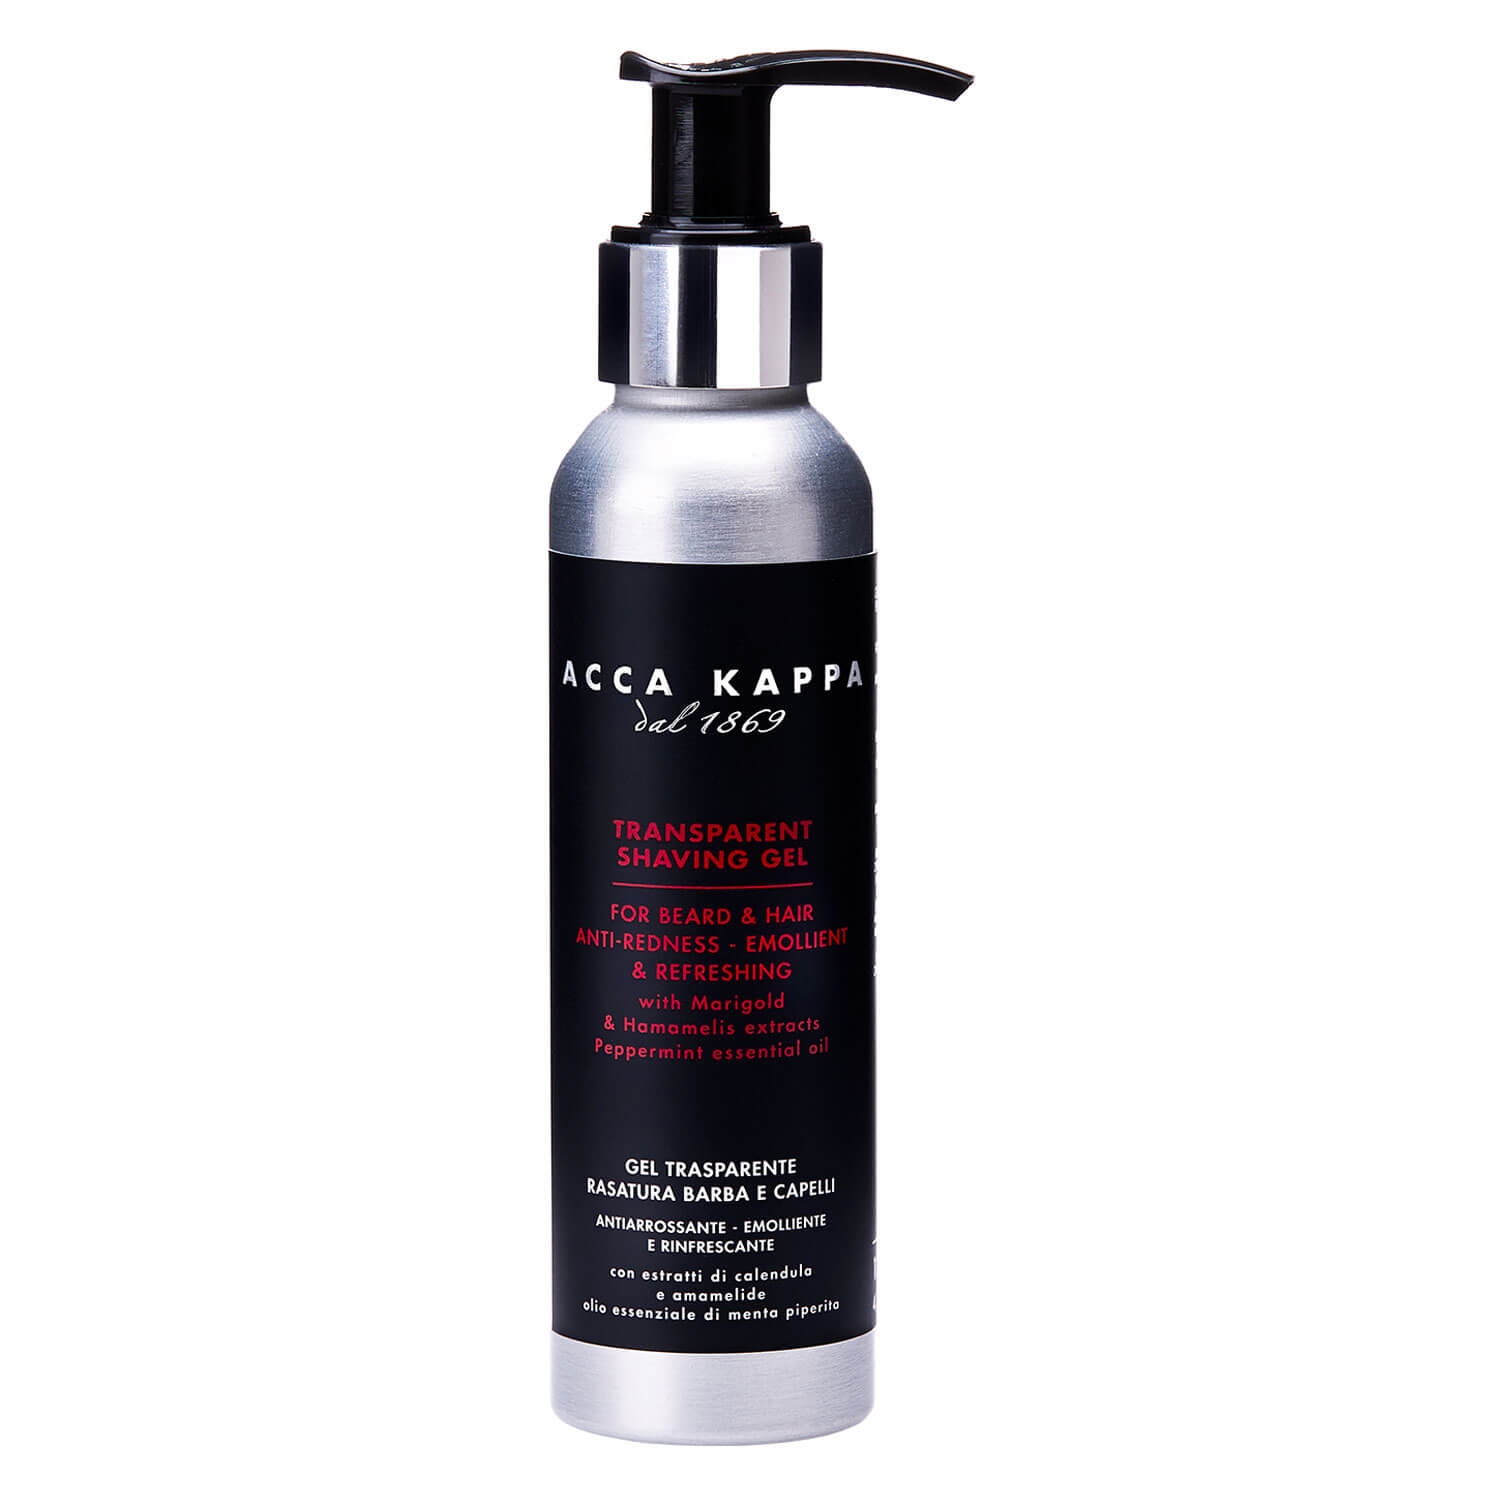 Product image from ACCA KAPPA - Transparent Shaving Gel